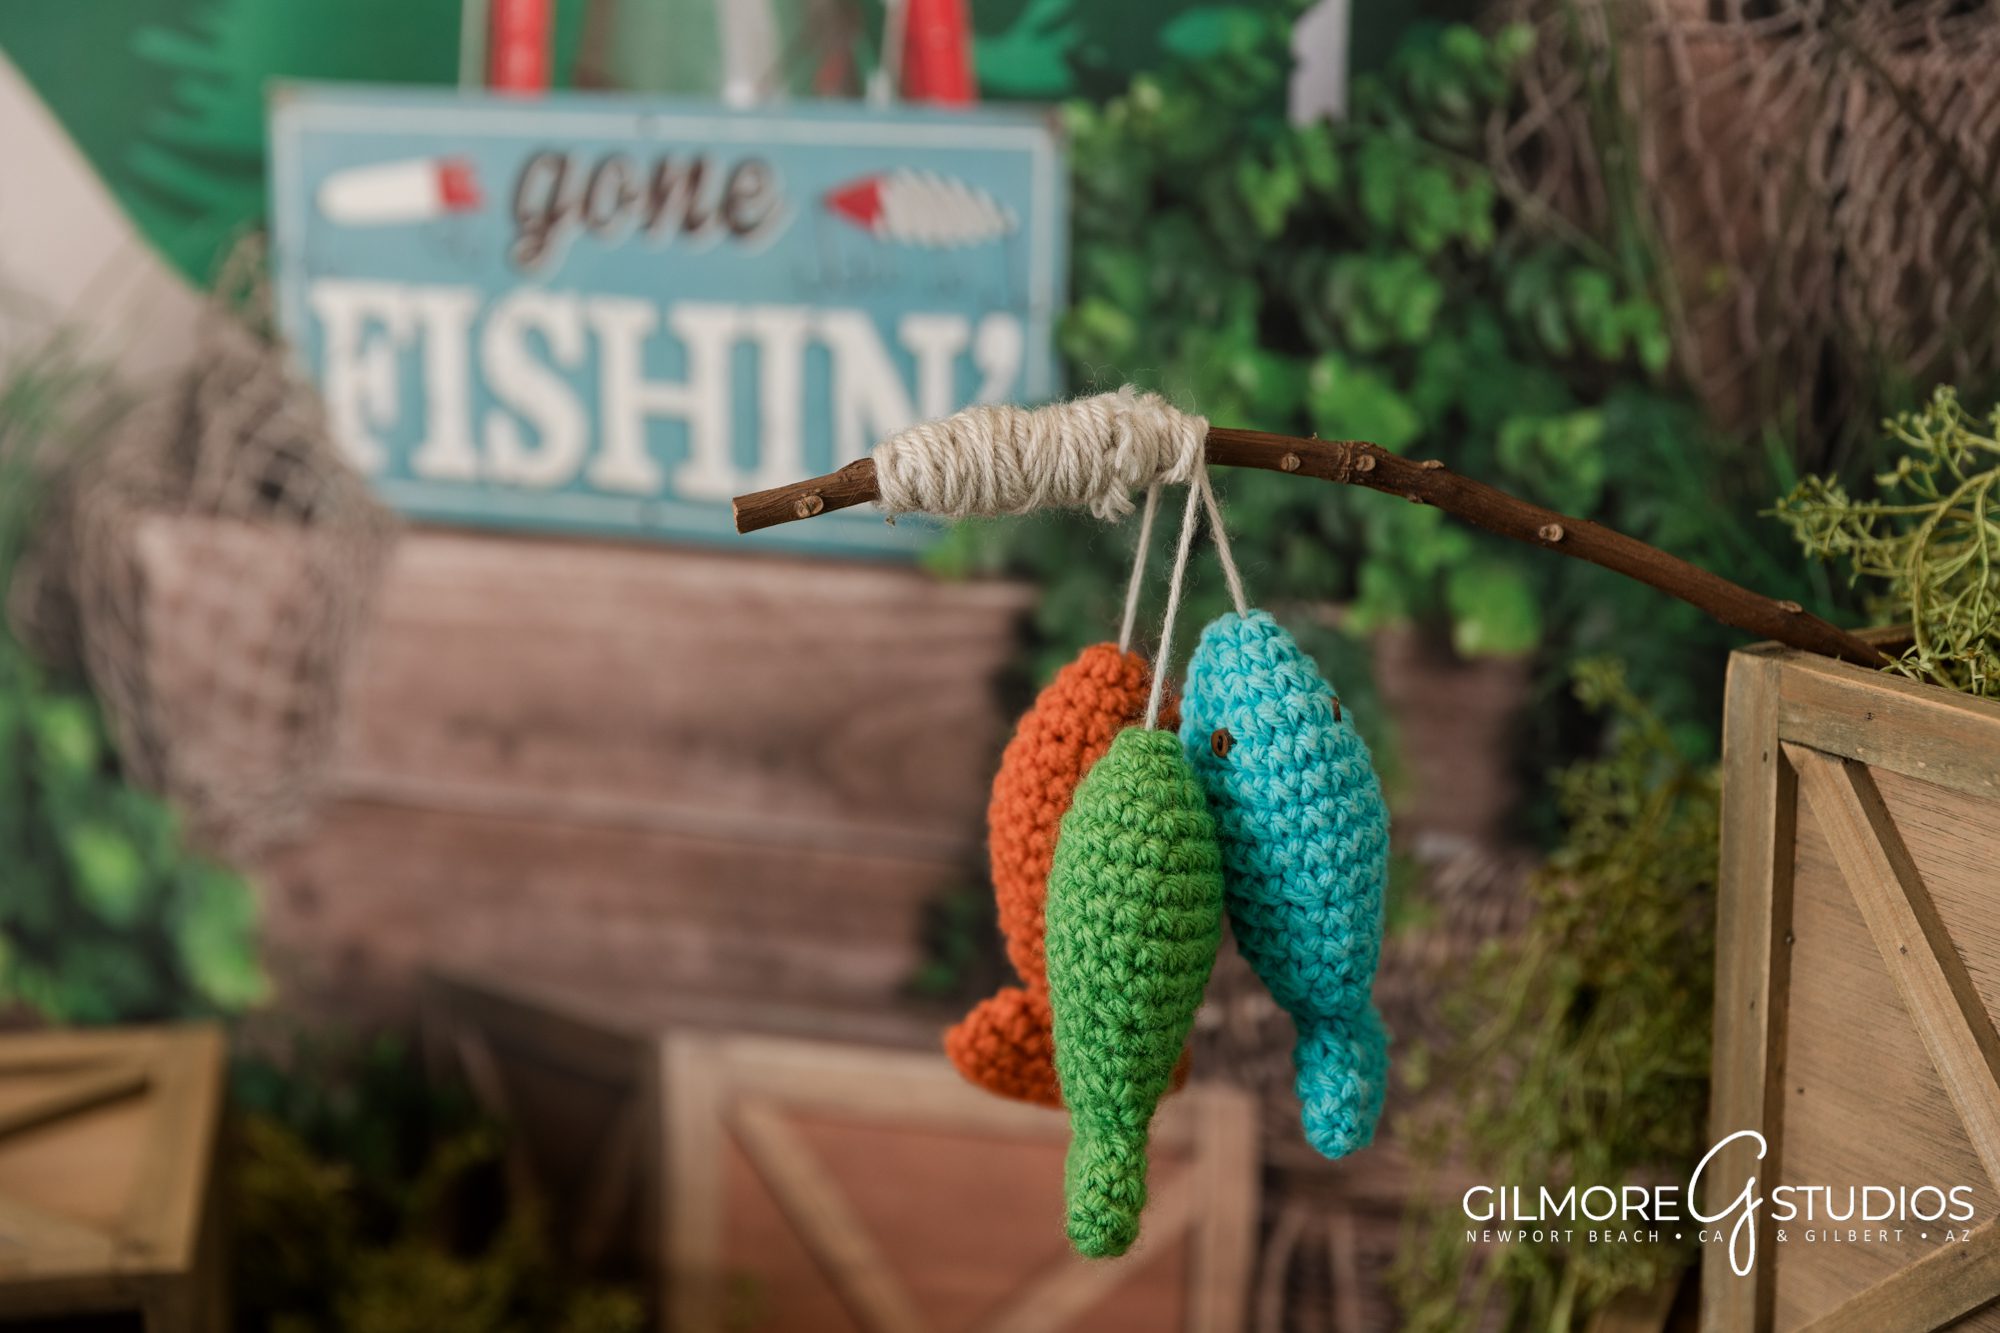 gilbert cake smash photographer, 1st birthday, east valley kids photography studio, gone fishin' first birthday photo session, fishing theme, one year old, cakes for boys birthday party, blue cake, bobbers, fishing pole, cute forest camping theme for boys